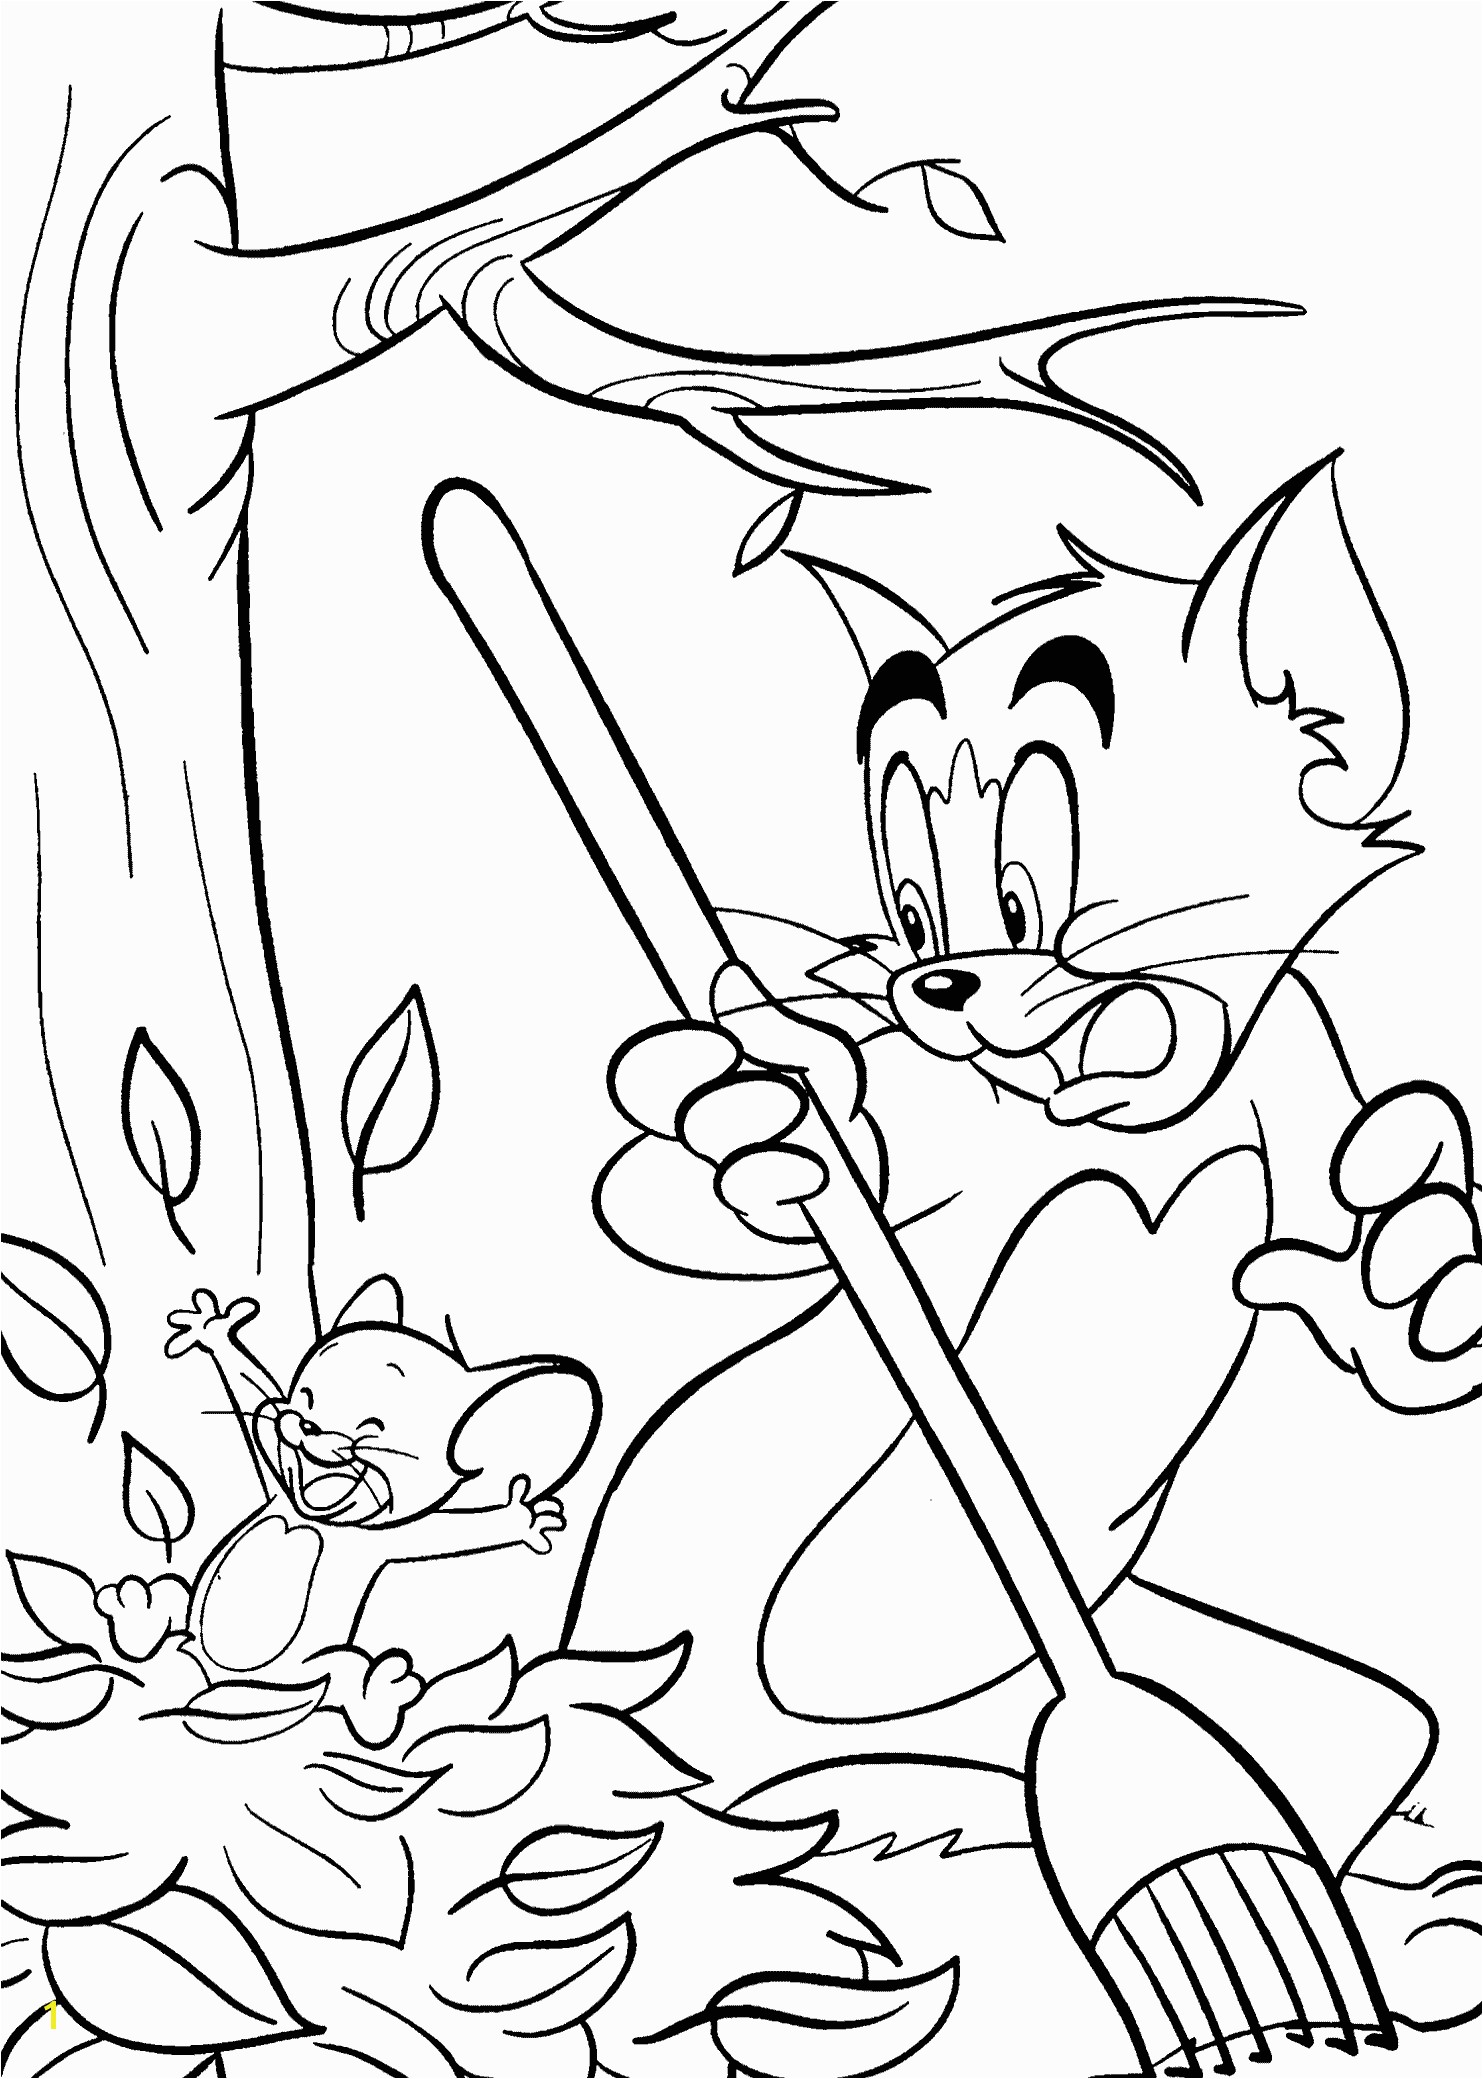 Liberty Kids Coloring Pages Best Colorings for Kids